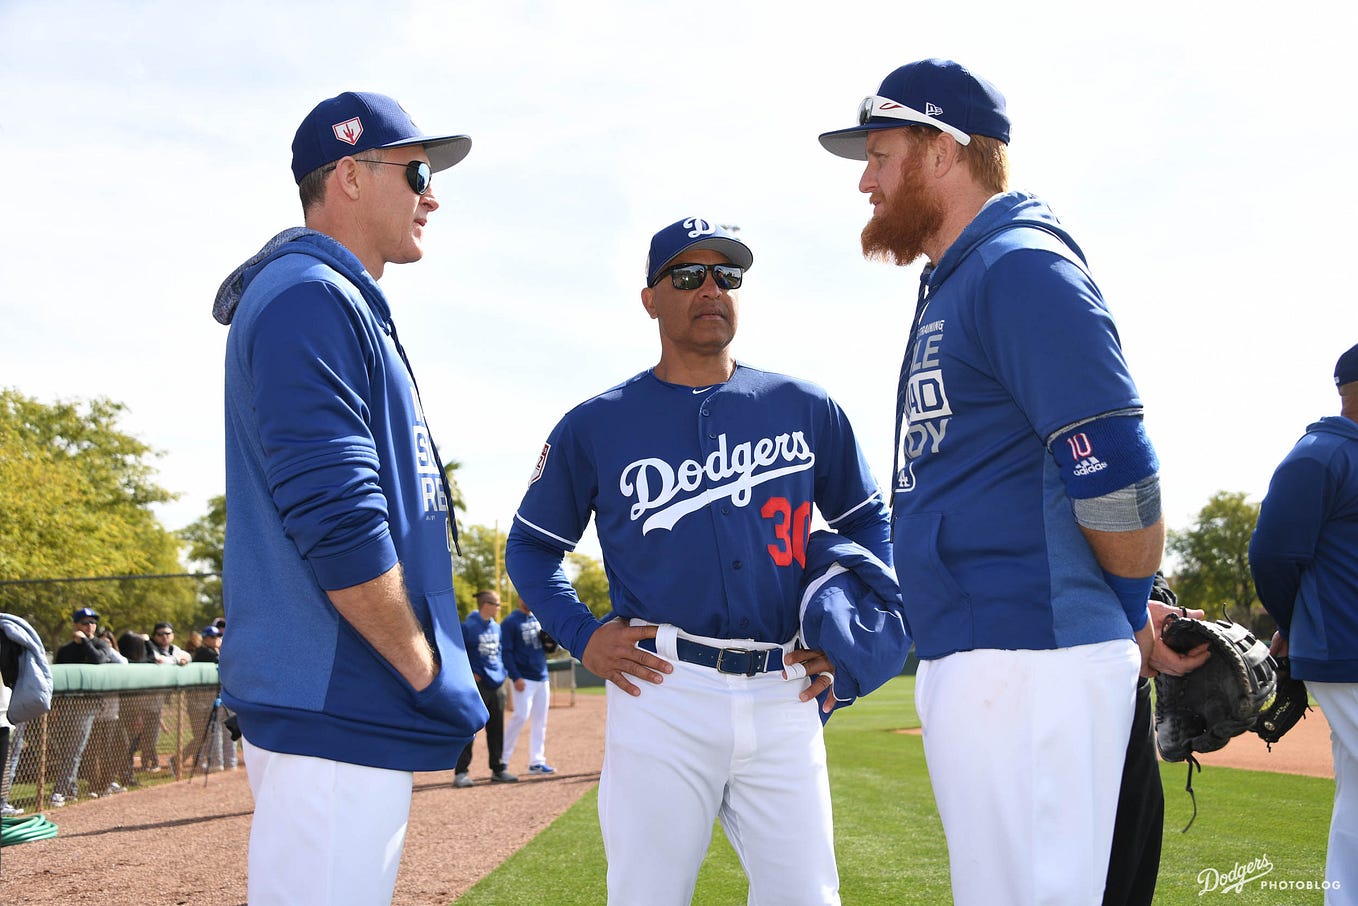 Dodgers and Justin Turner honor veterans at annual batting practice event, by Sue Jo